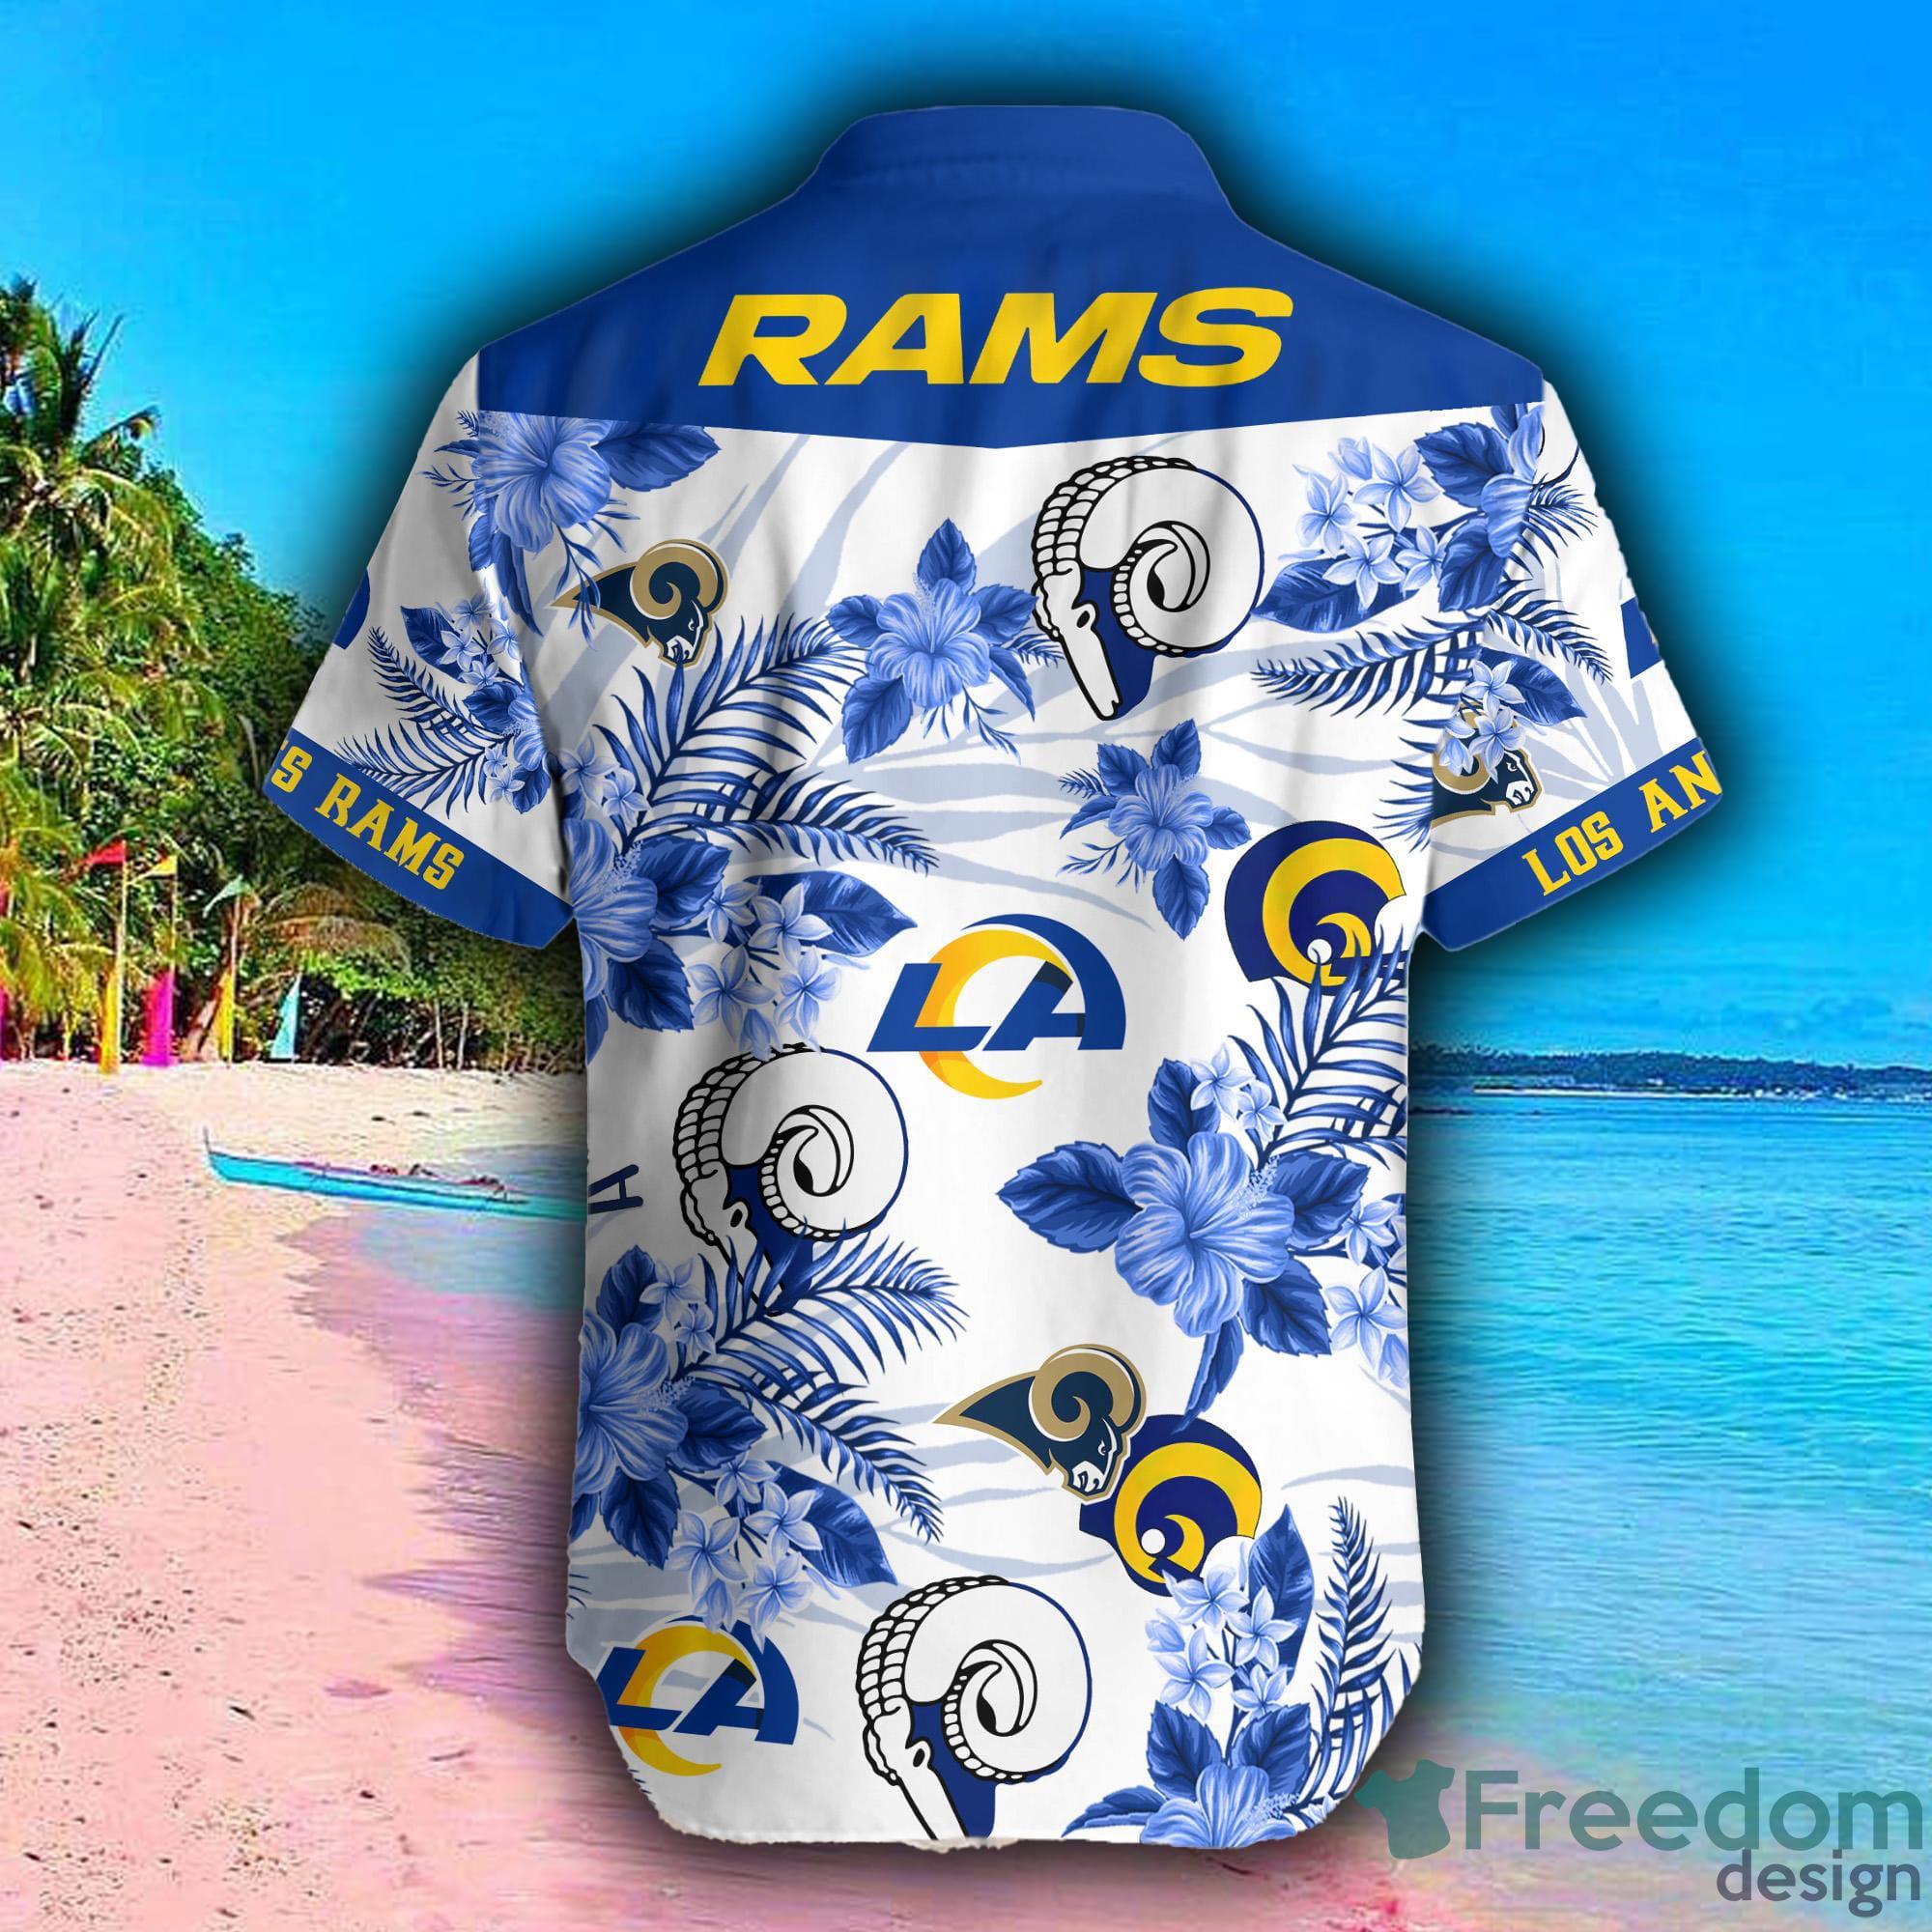 Los Angeles Rams Women's Apparel, Rams Ladies Jerseys, Gifts for her,  Clothing